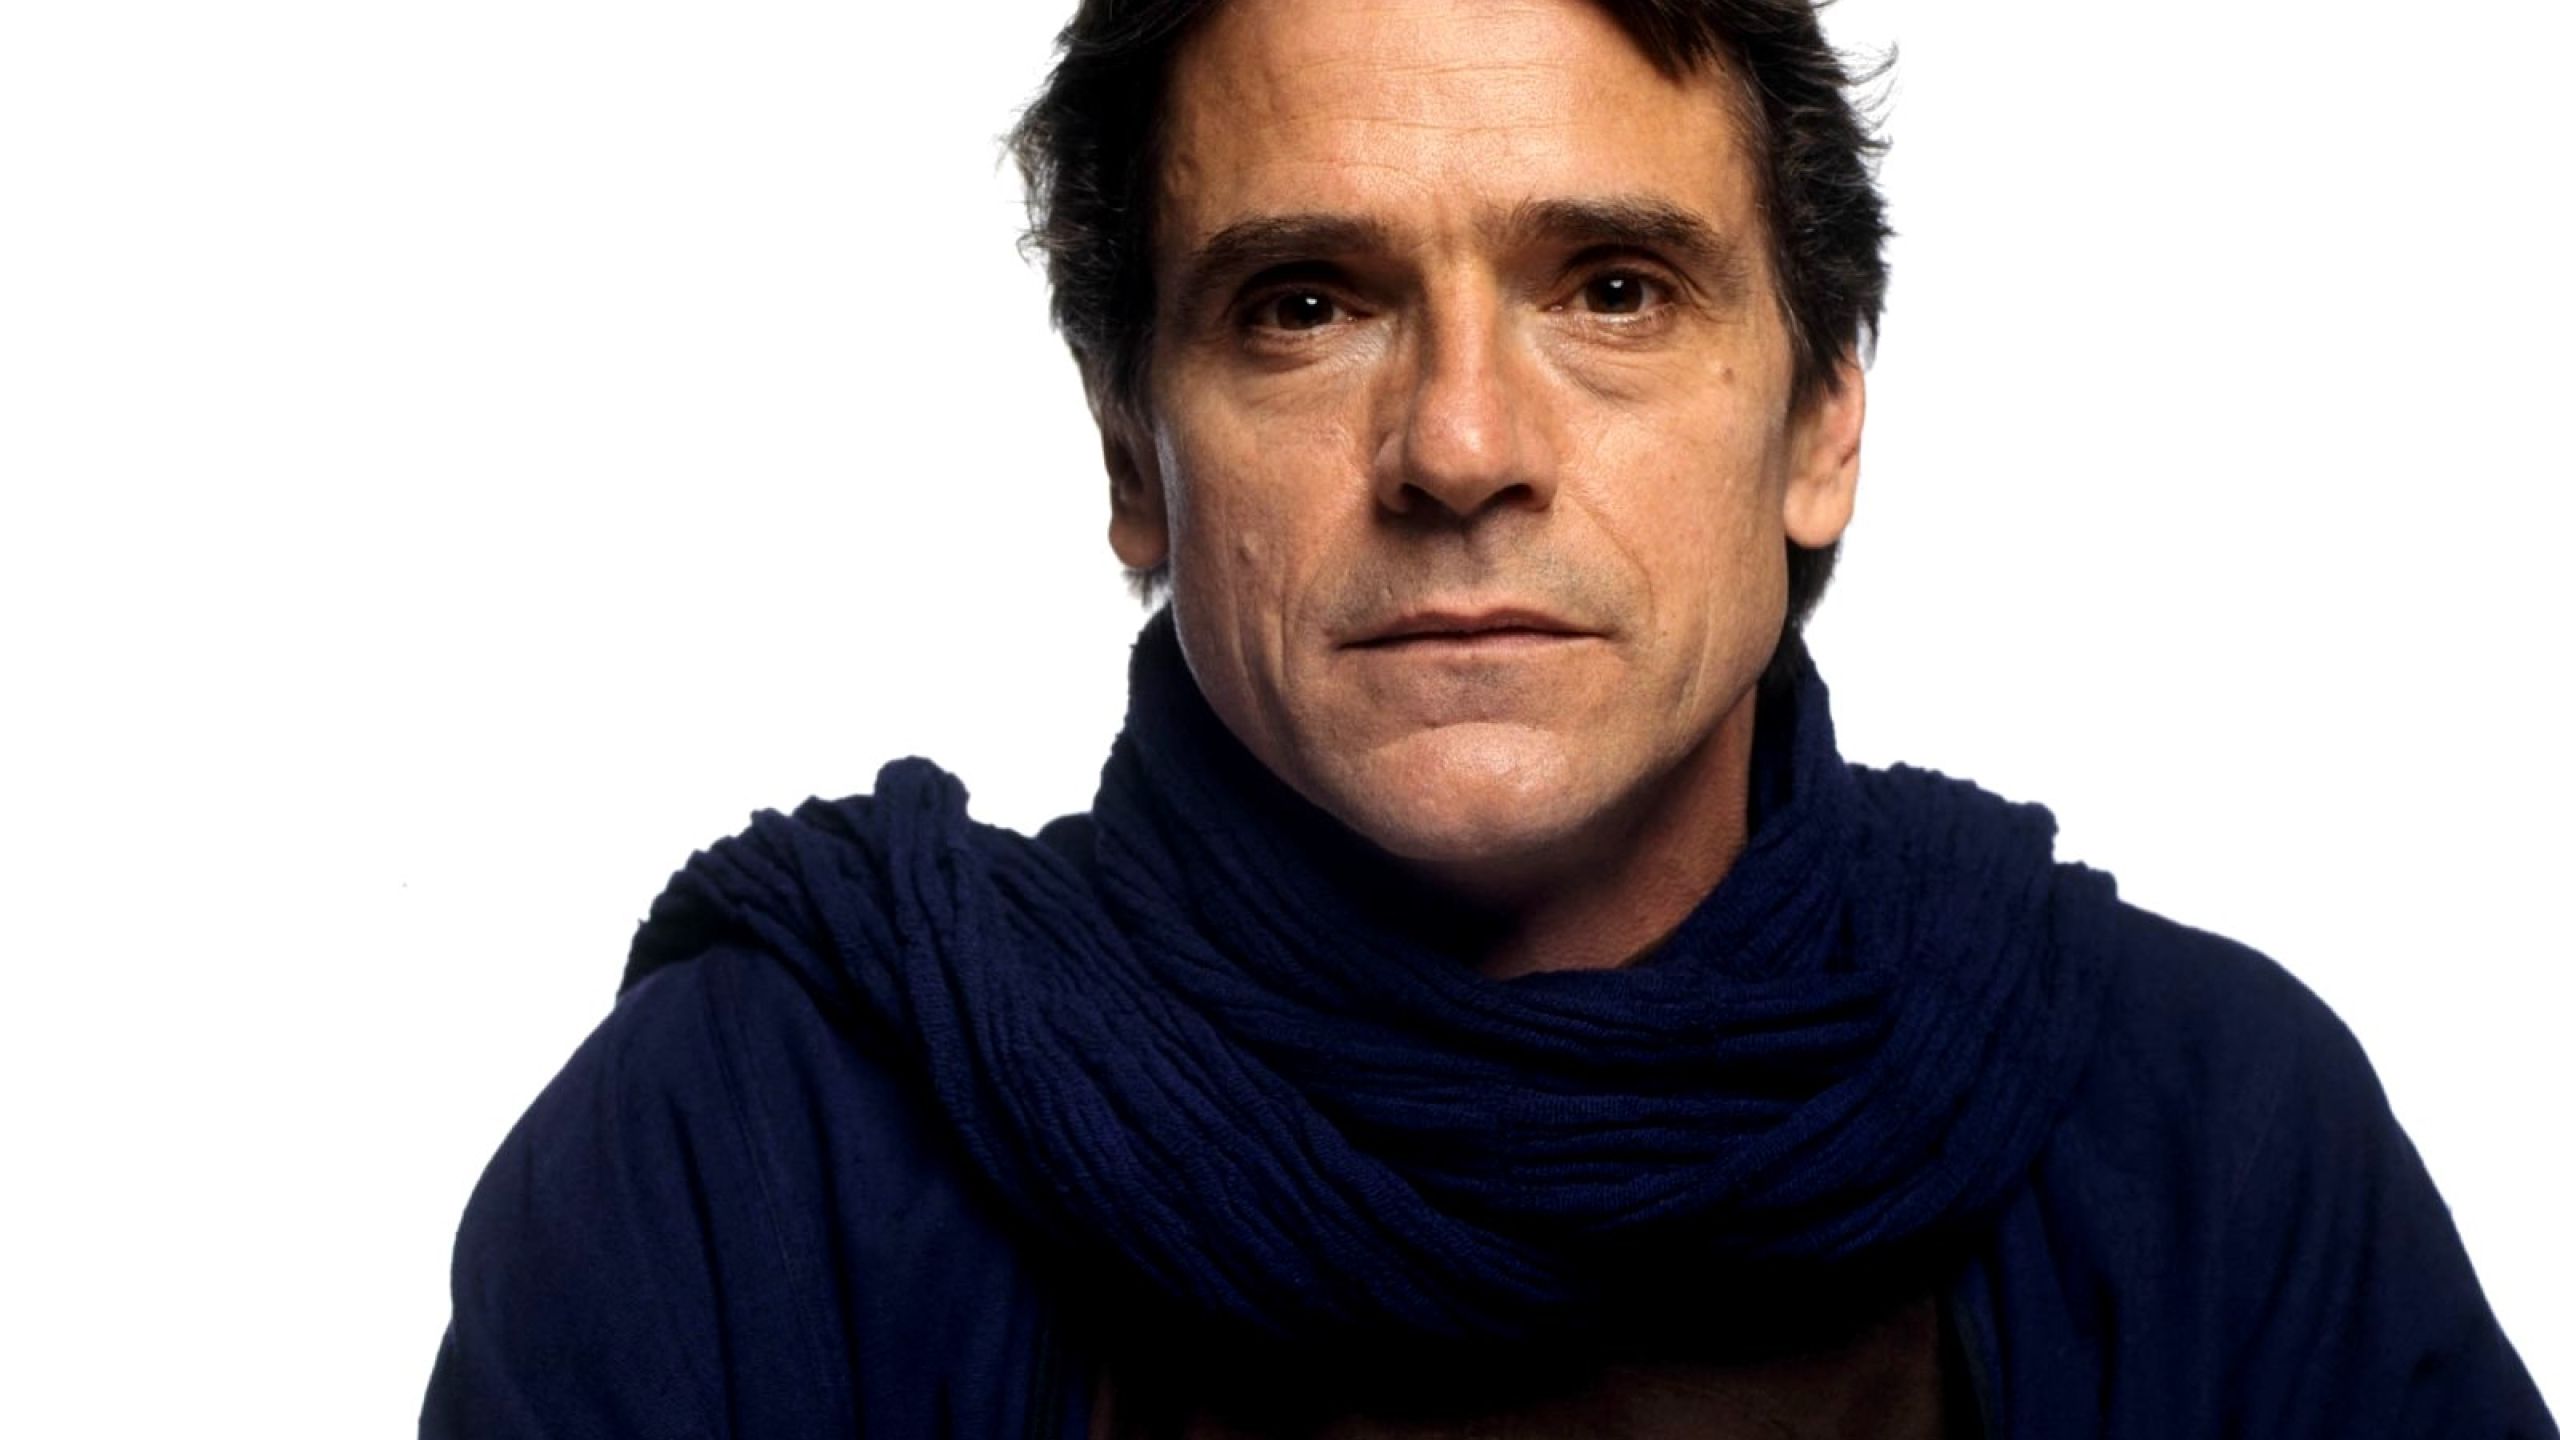 jeremy irons, actor, face 1440P Resolution Wallpaper, HD